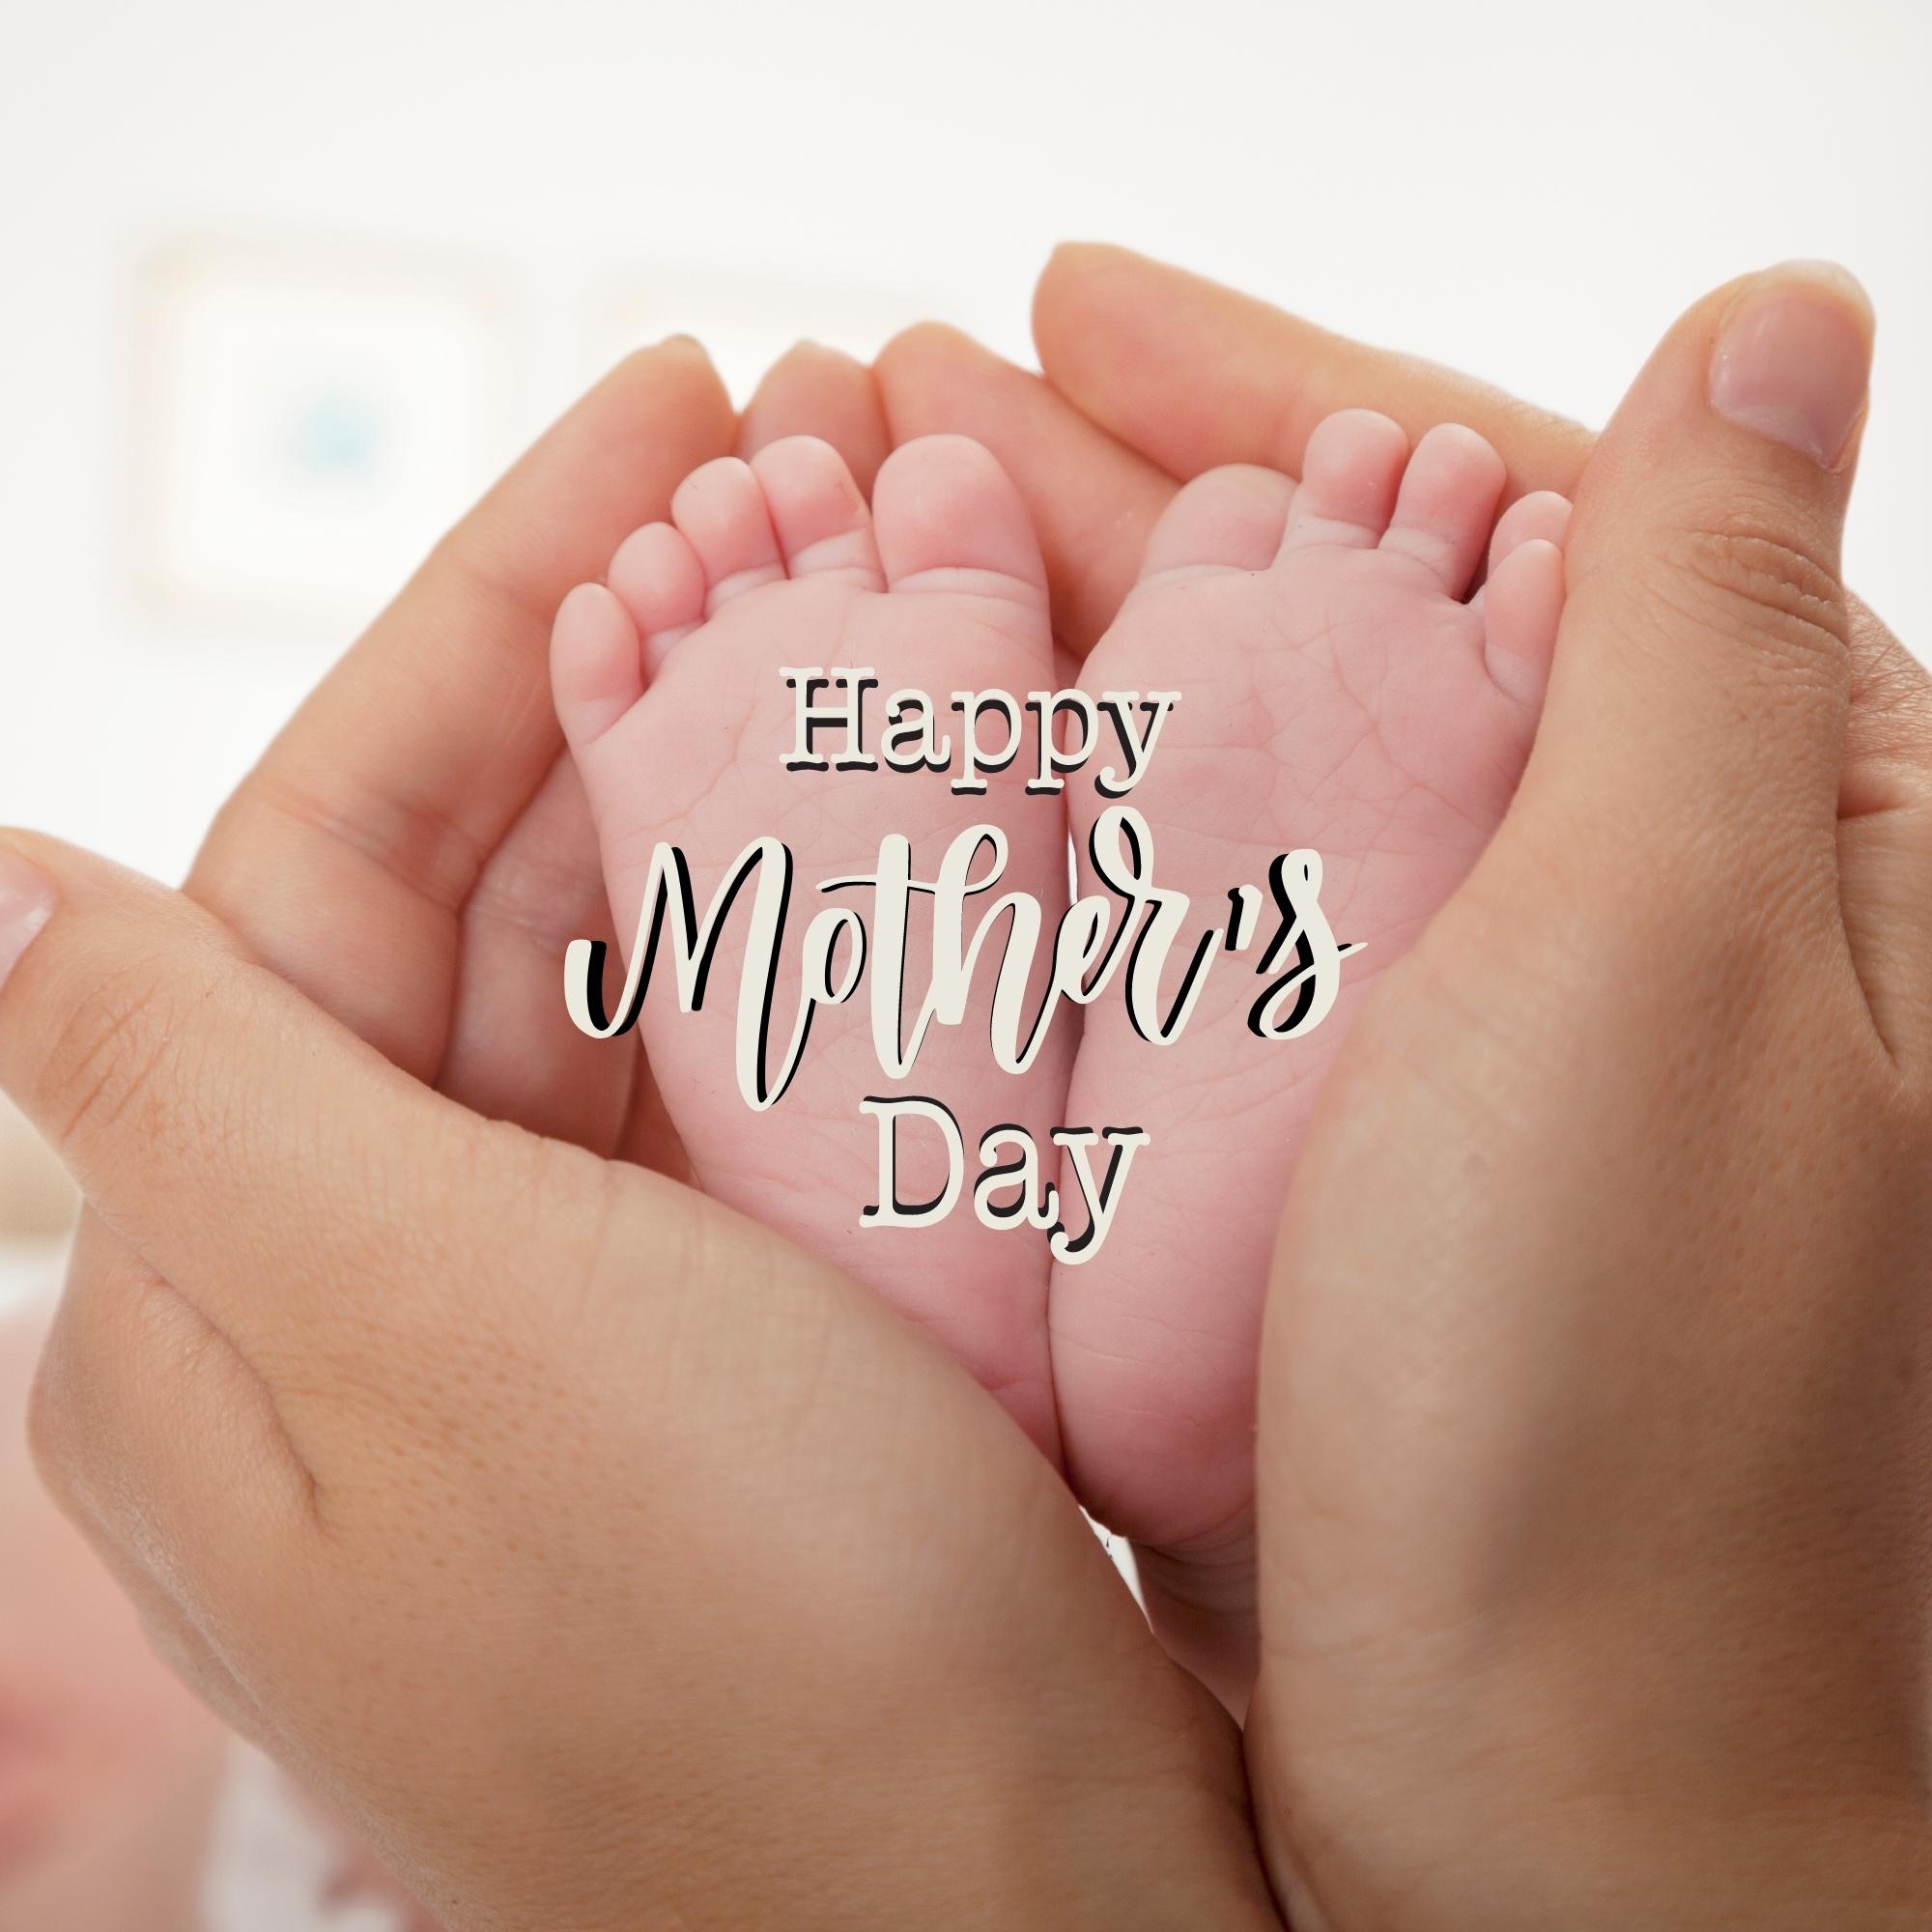 Happy Mothers Day Images | 1047 | Free Download [8k,4k,Hd]